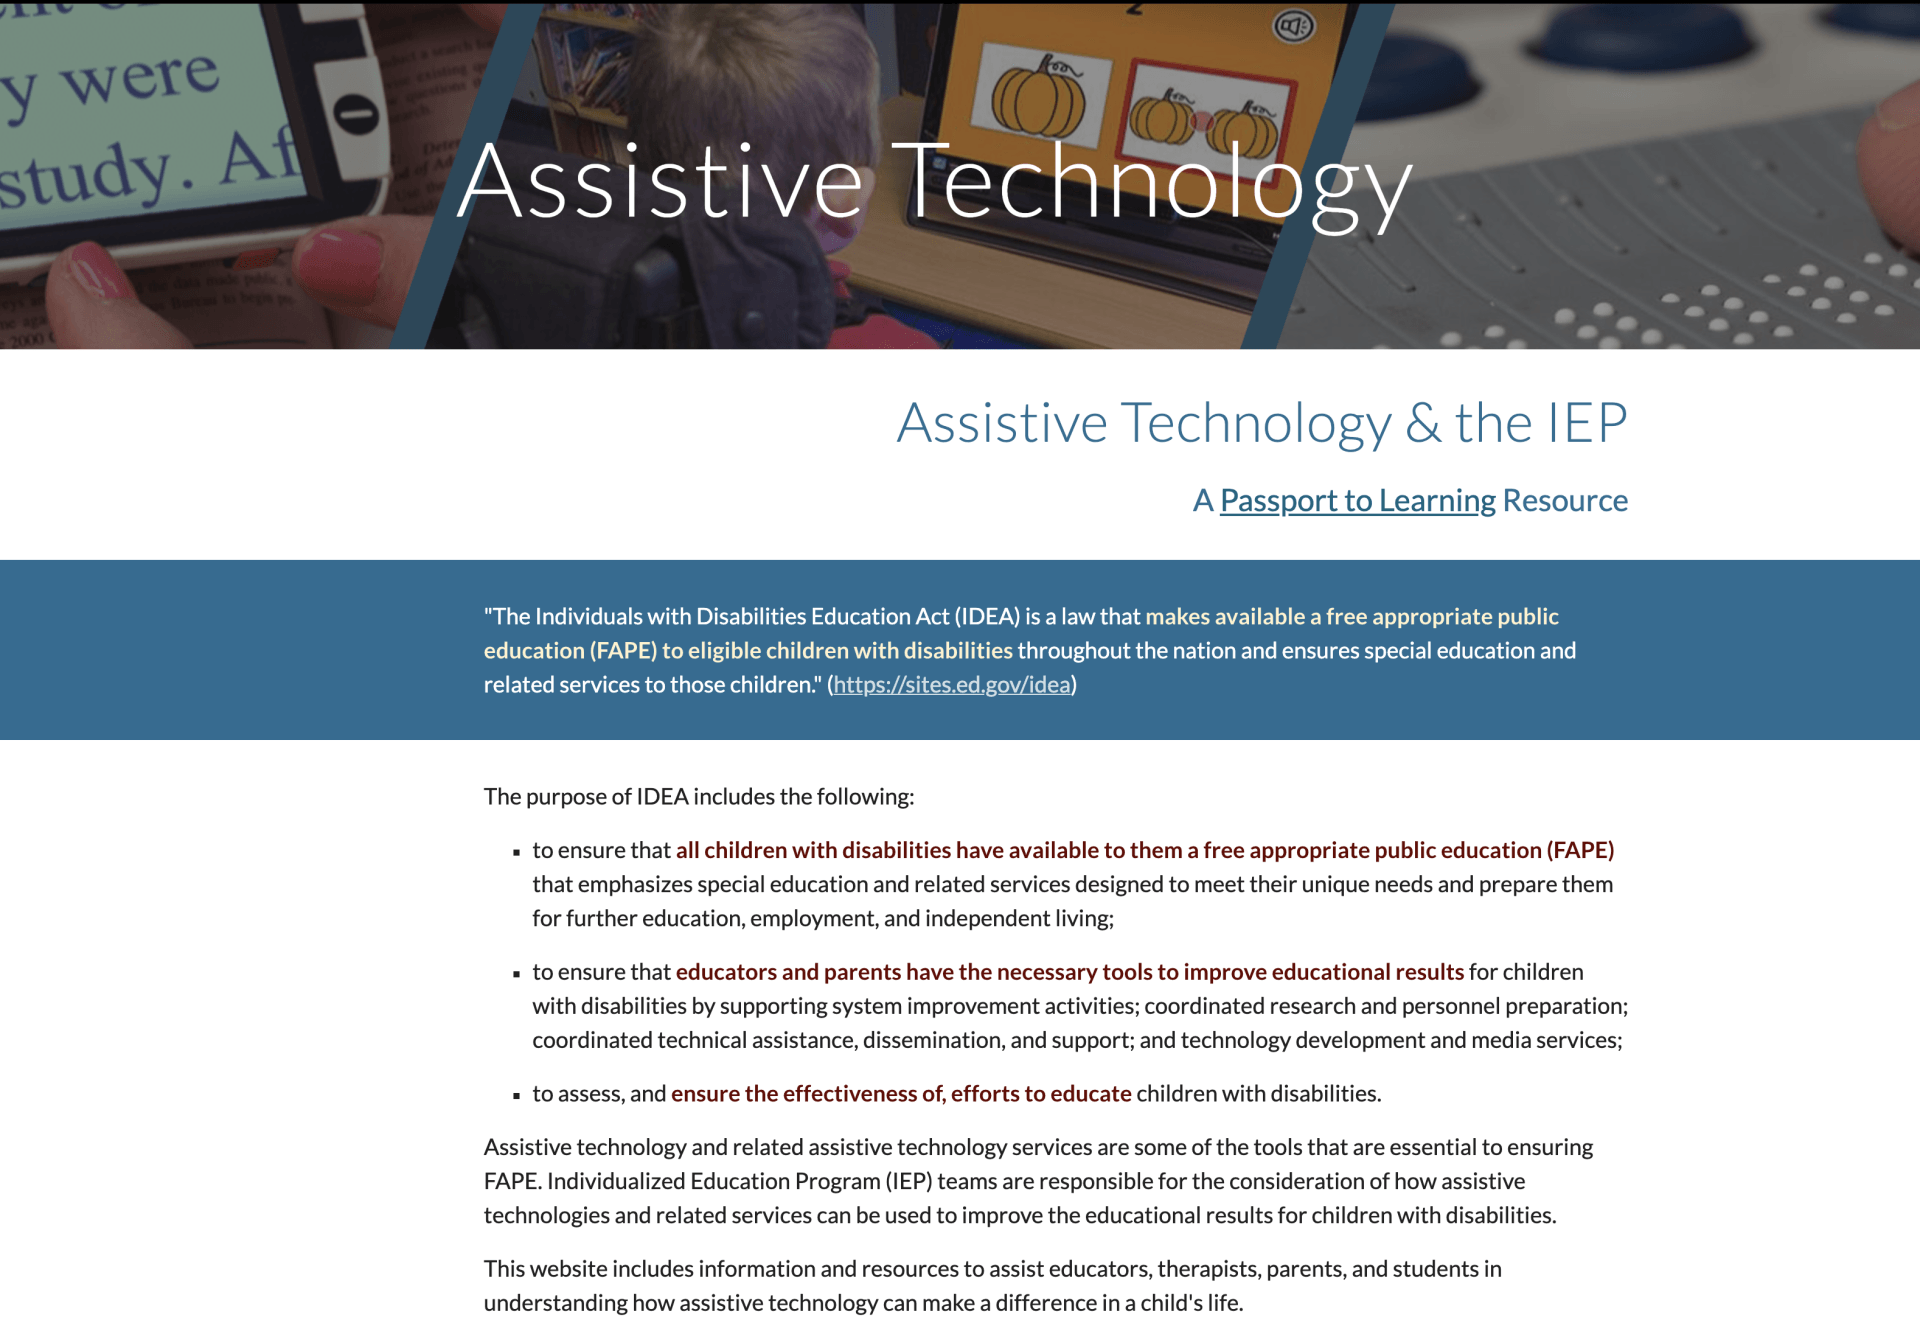 Screenshot of Assistive Technology and the IEP Website